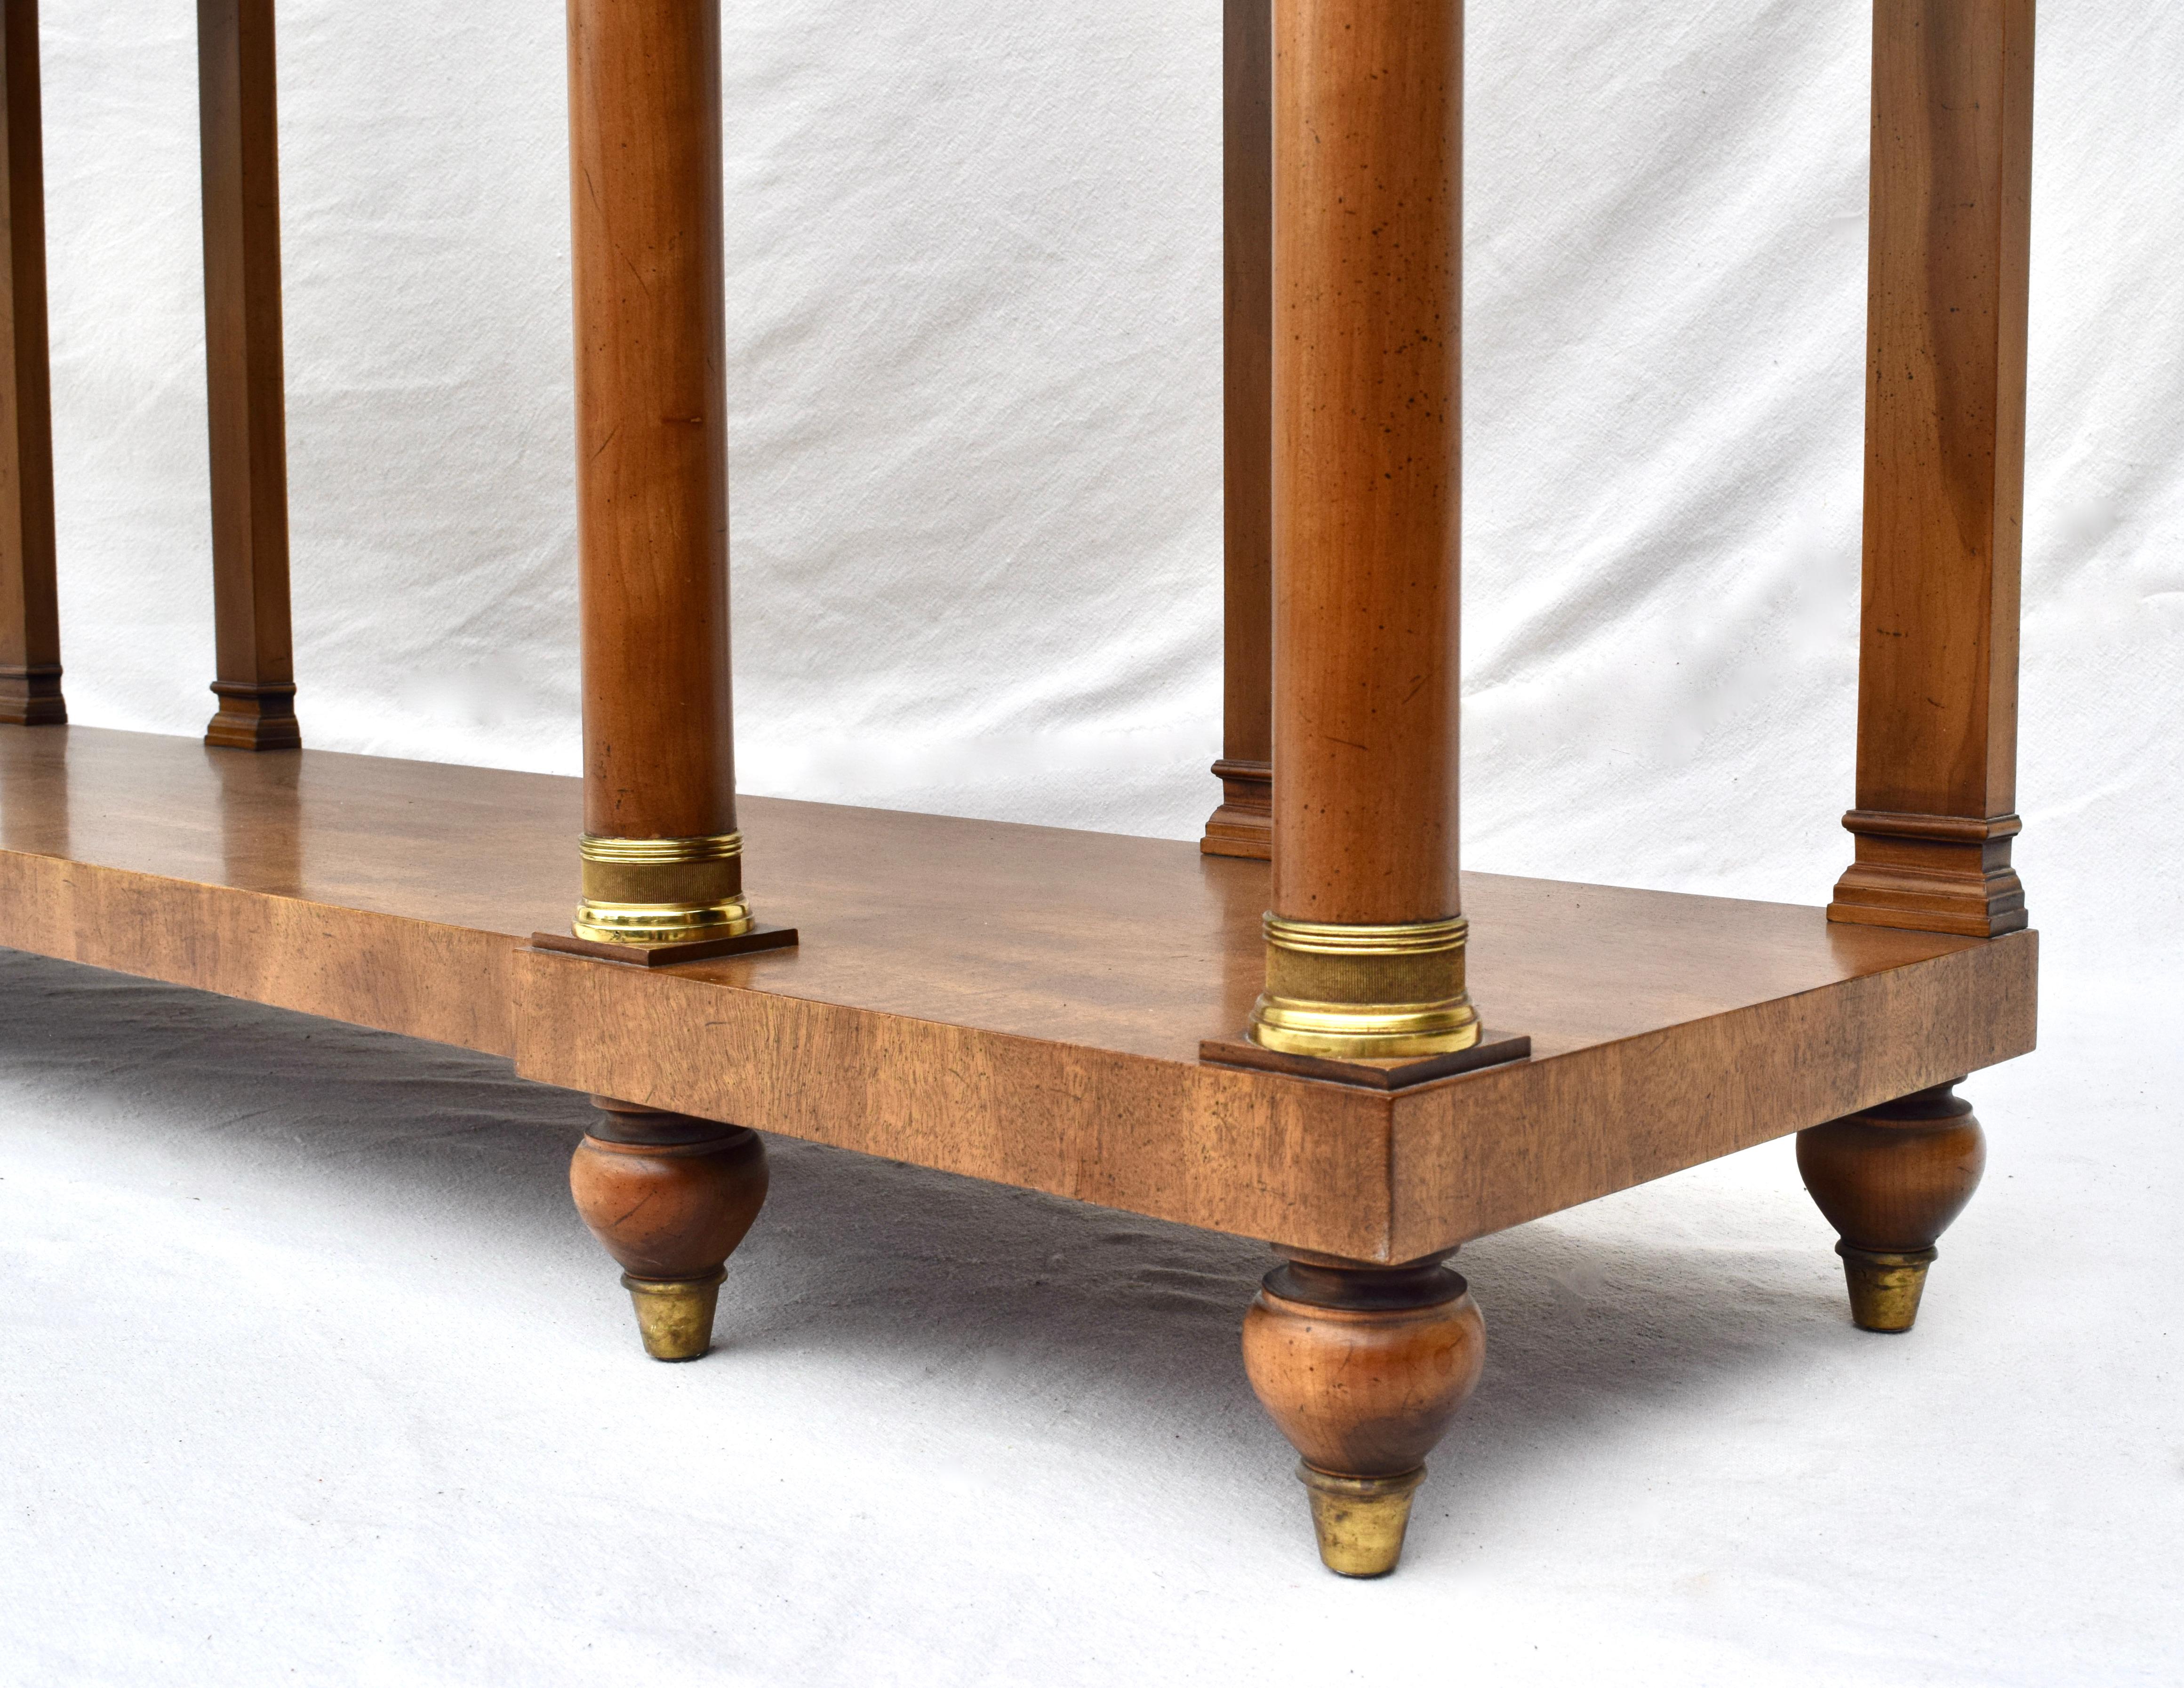 20th Century John Widdicomb French Neoclassical Style Server or Console Table